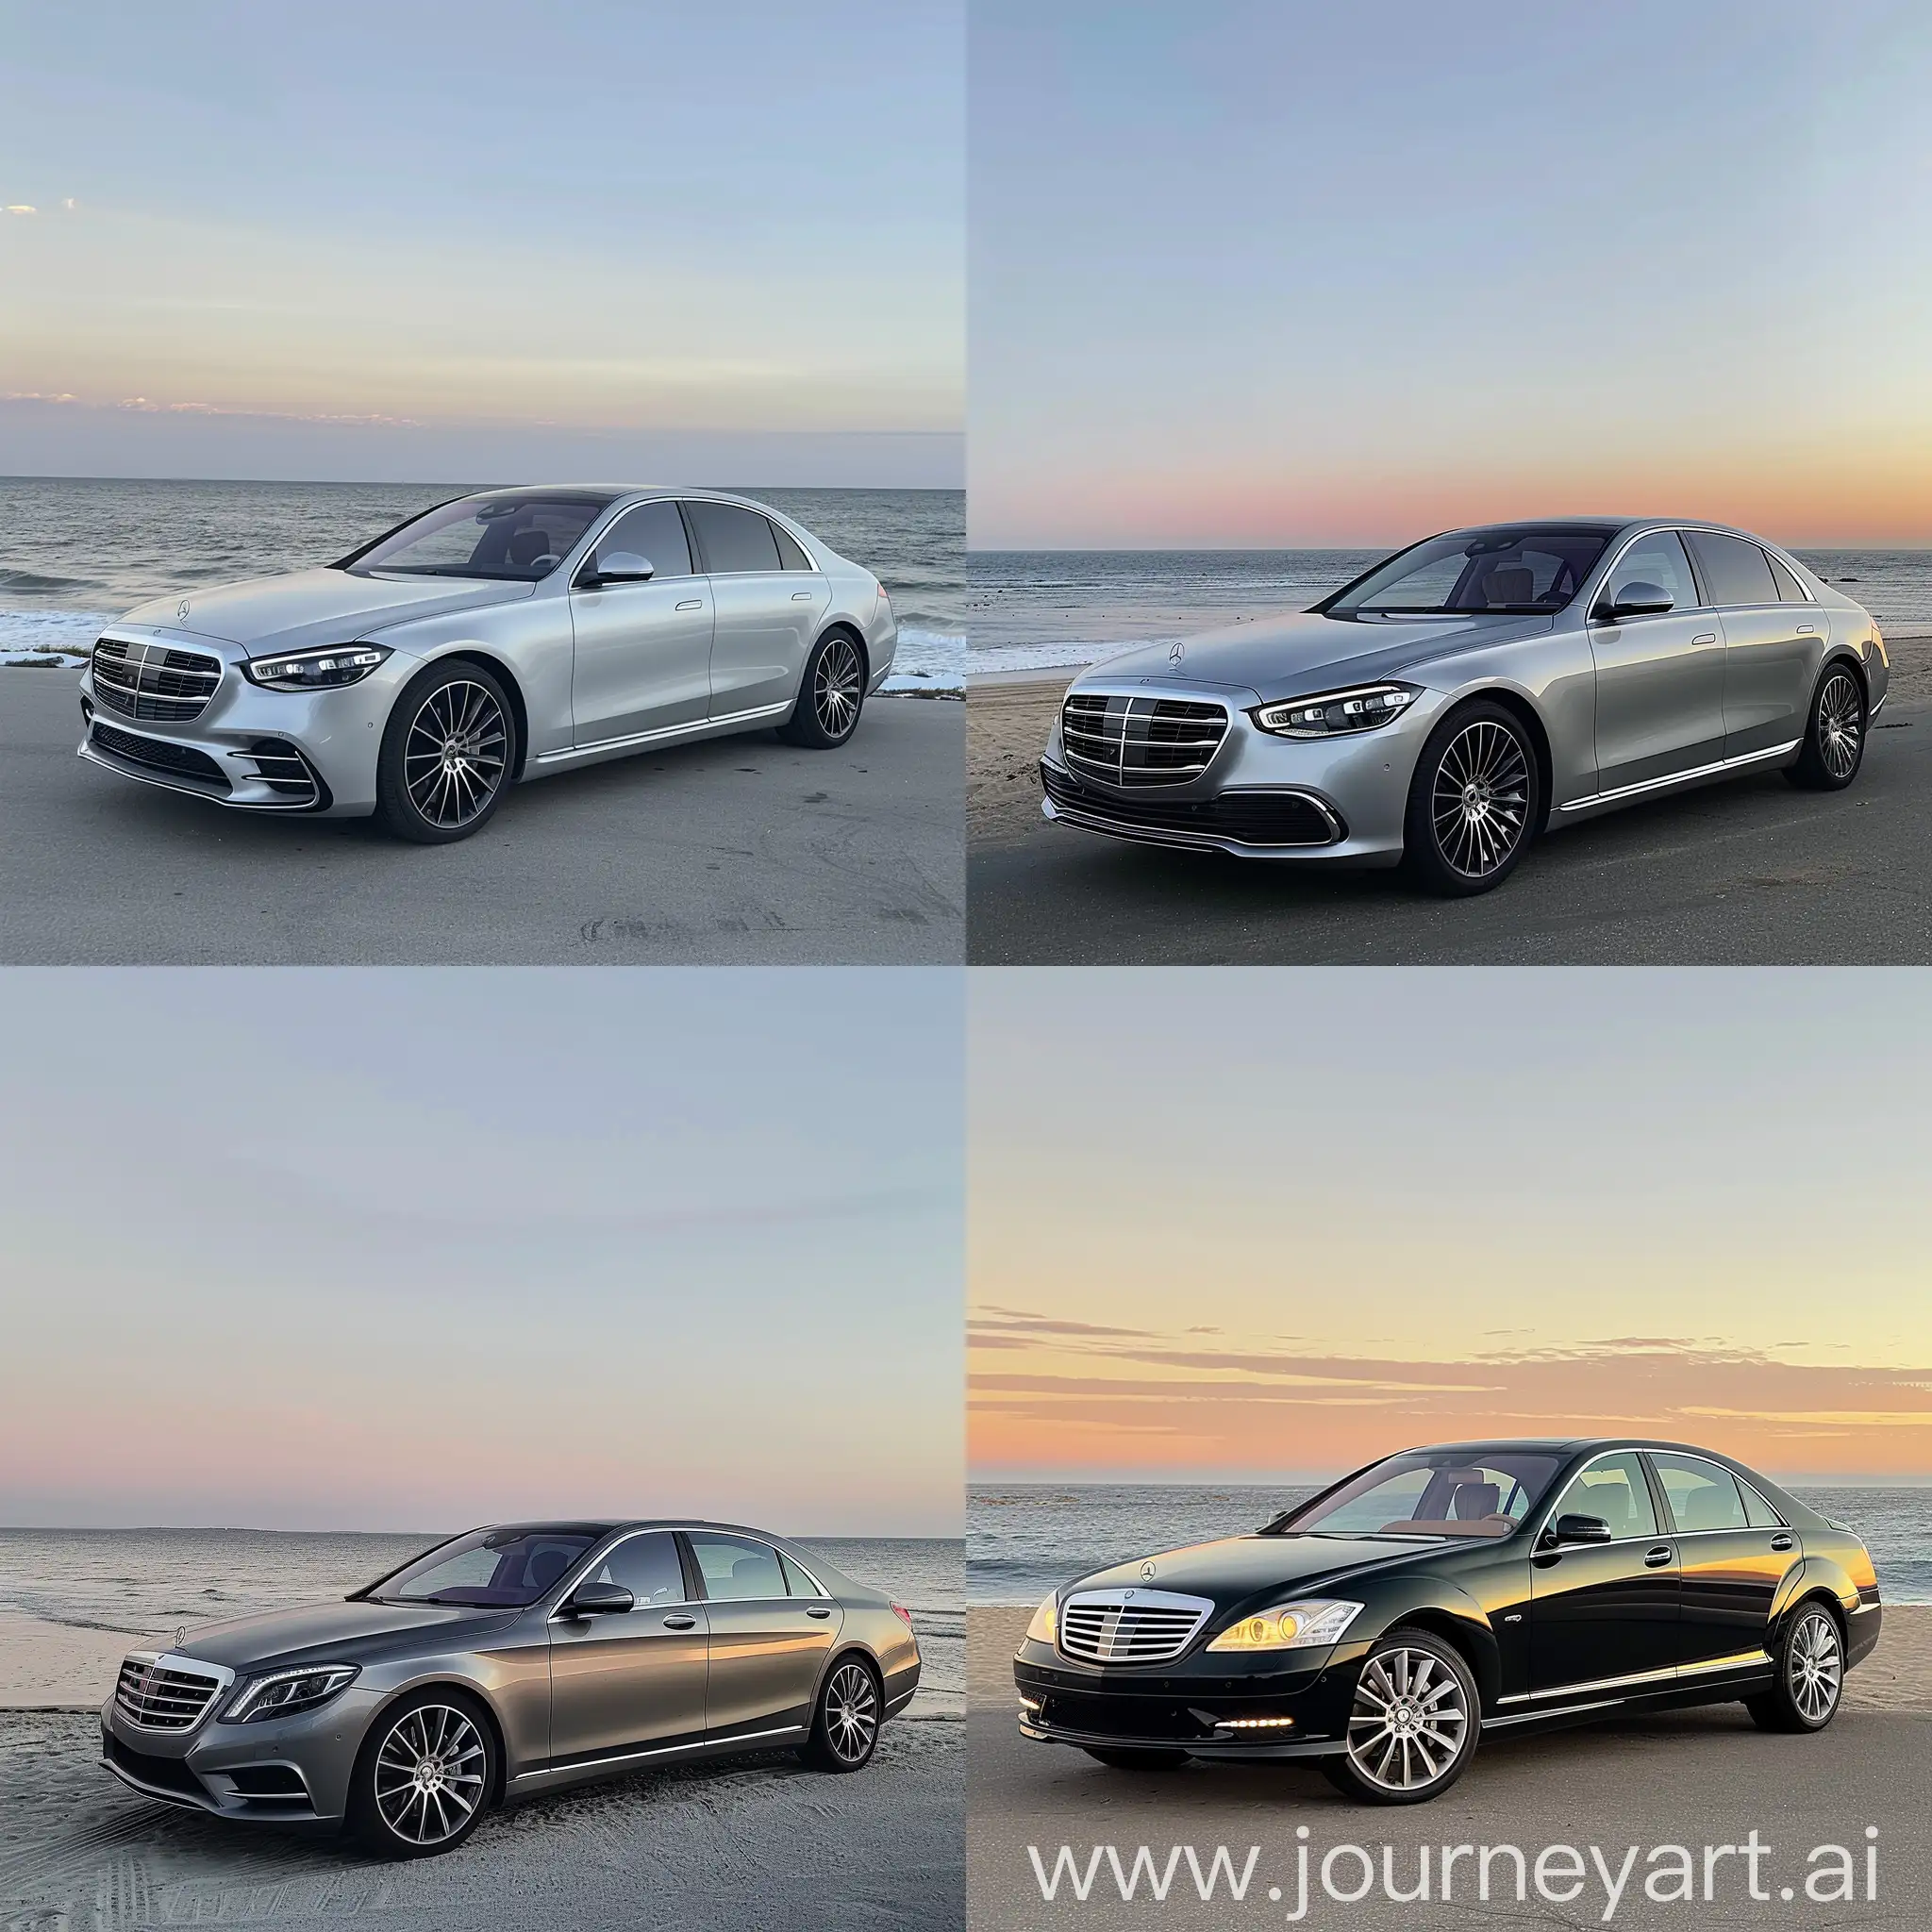 mercedes benz s500, is parked near the beach, The backdrop is a serene ocean under a clear sky, suggesting sunrise or sunset lighting.